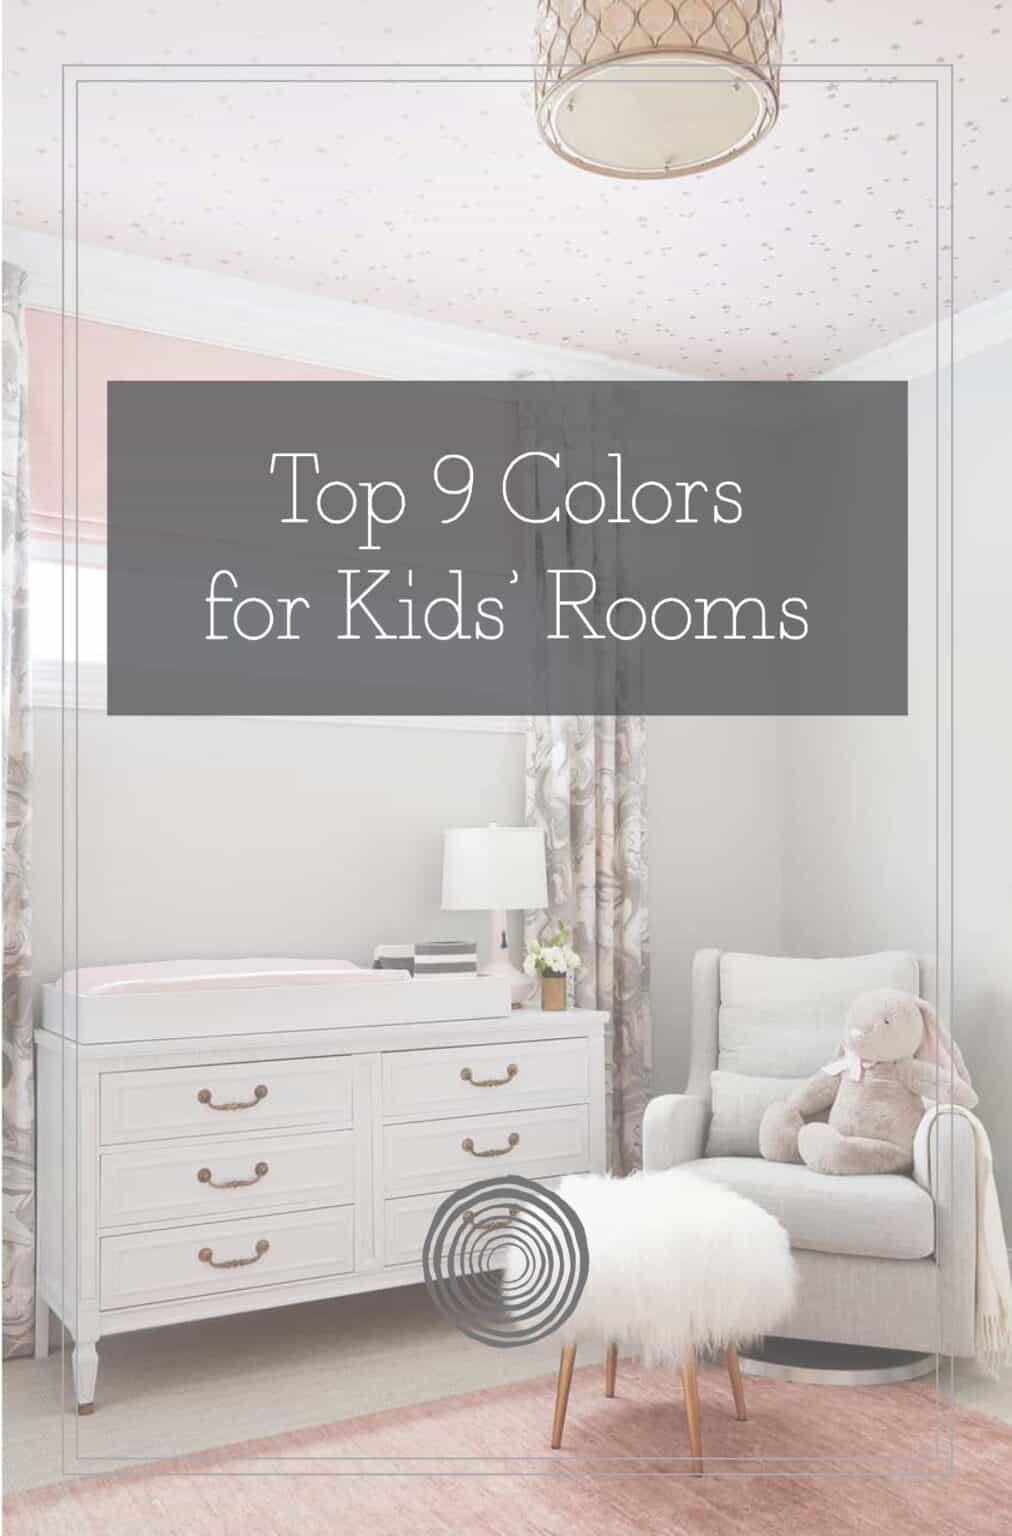 Top 9 Colors for Kids' Rooms - Centered by Design